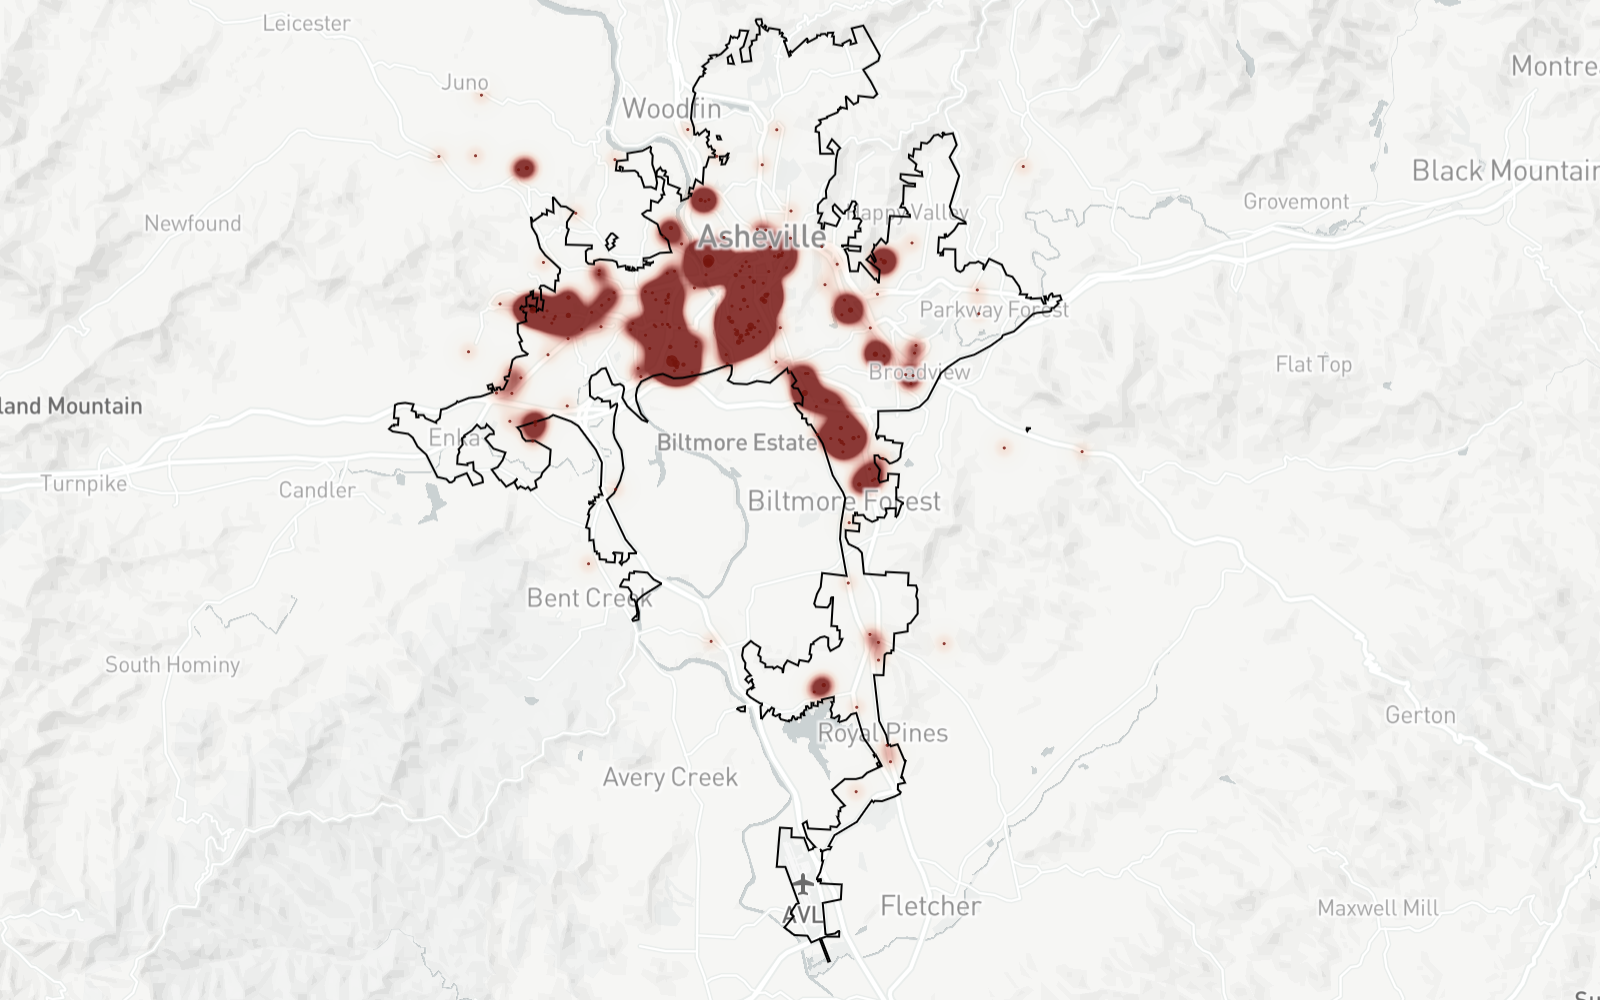 Link to an interactive illustration of gun violence in Asheville